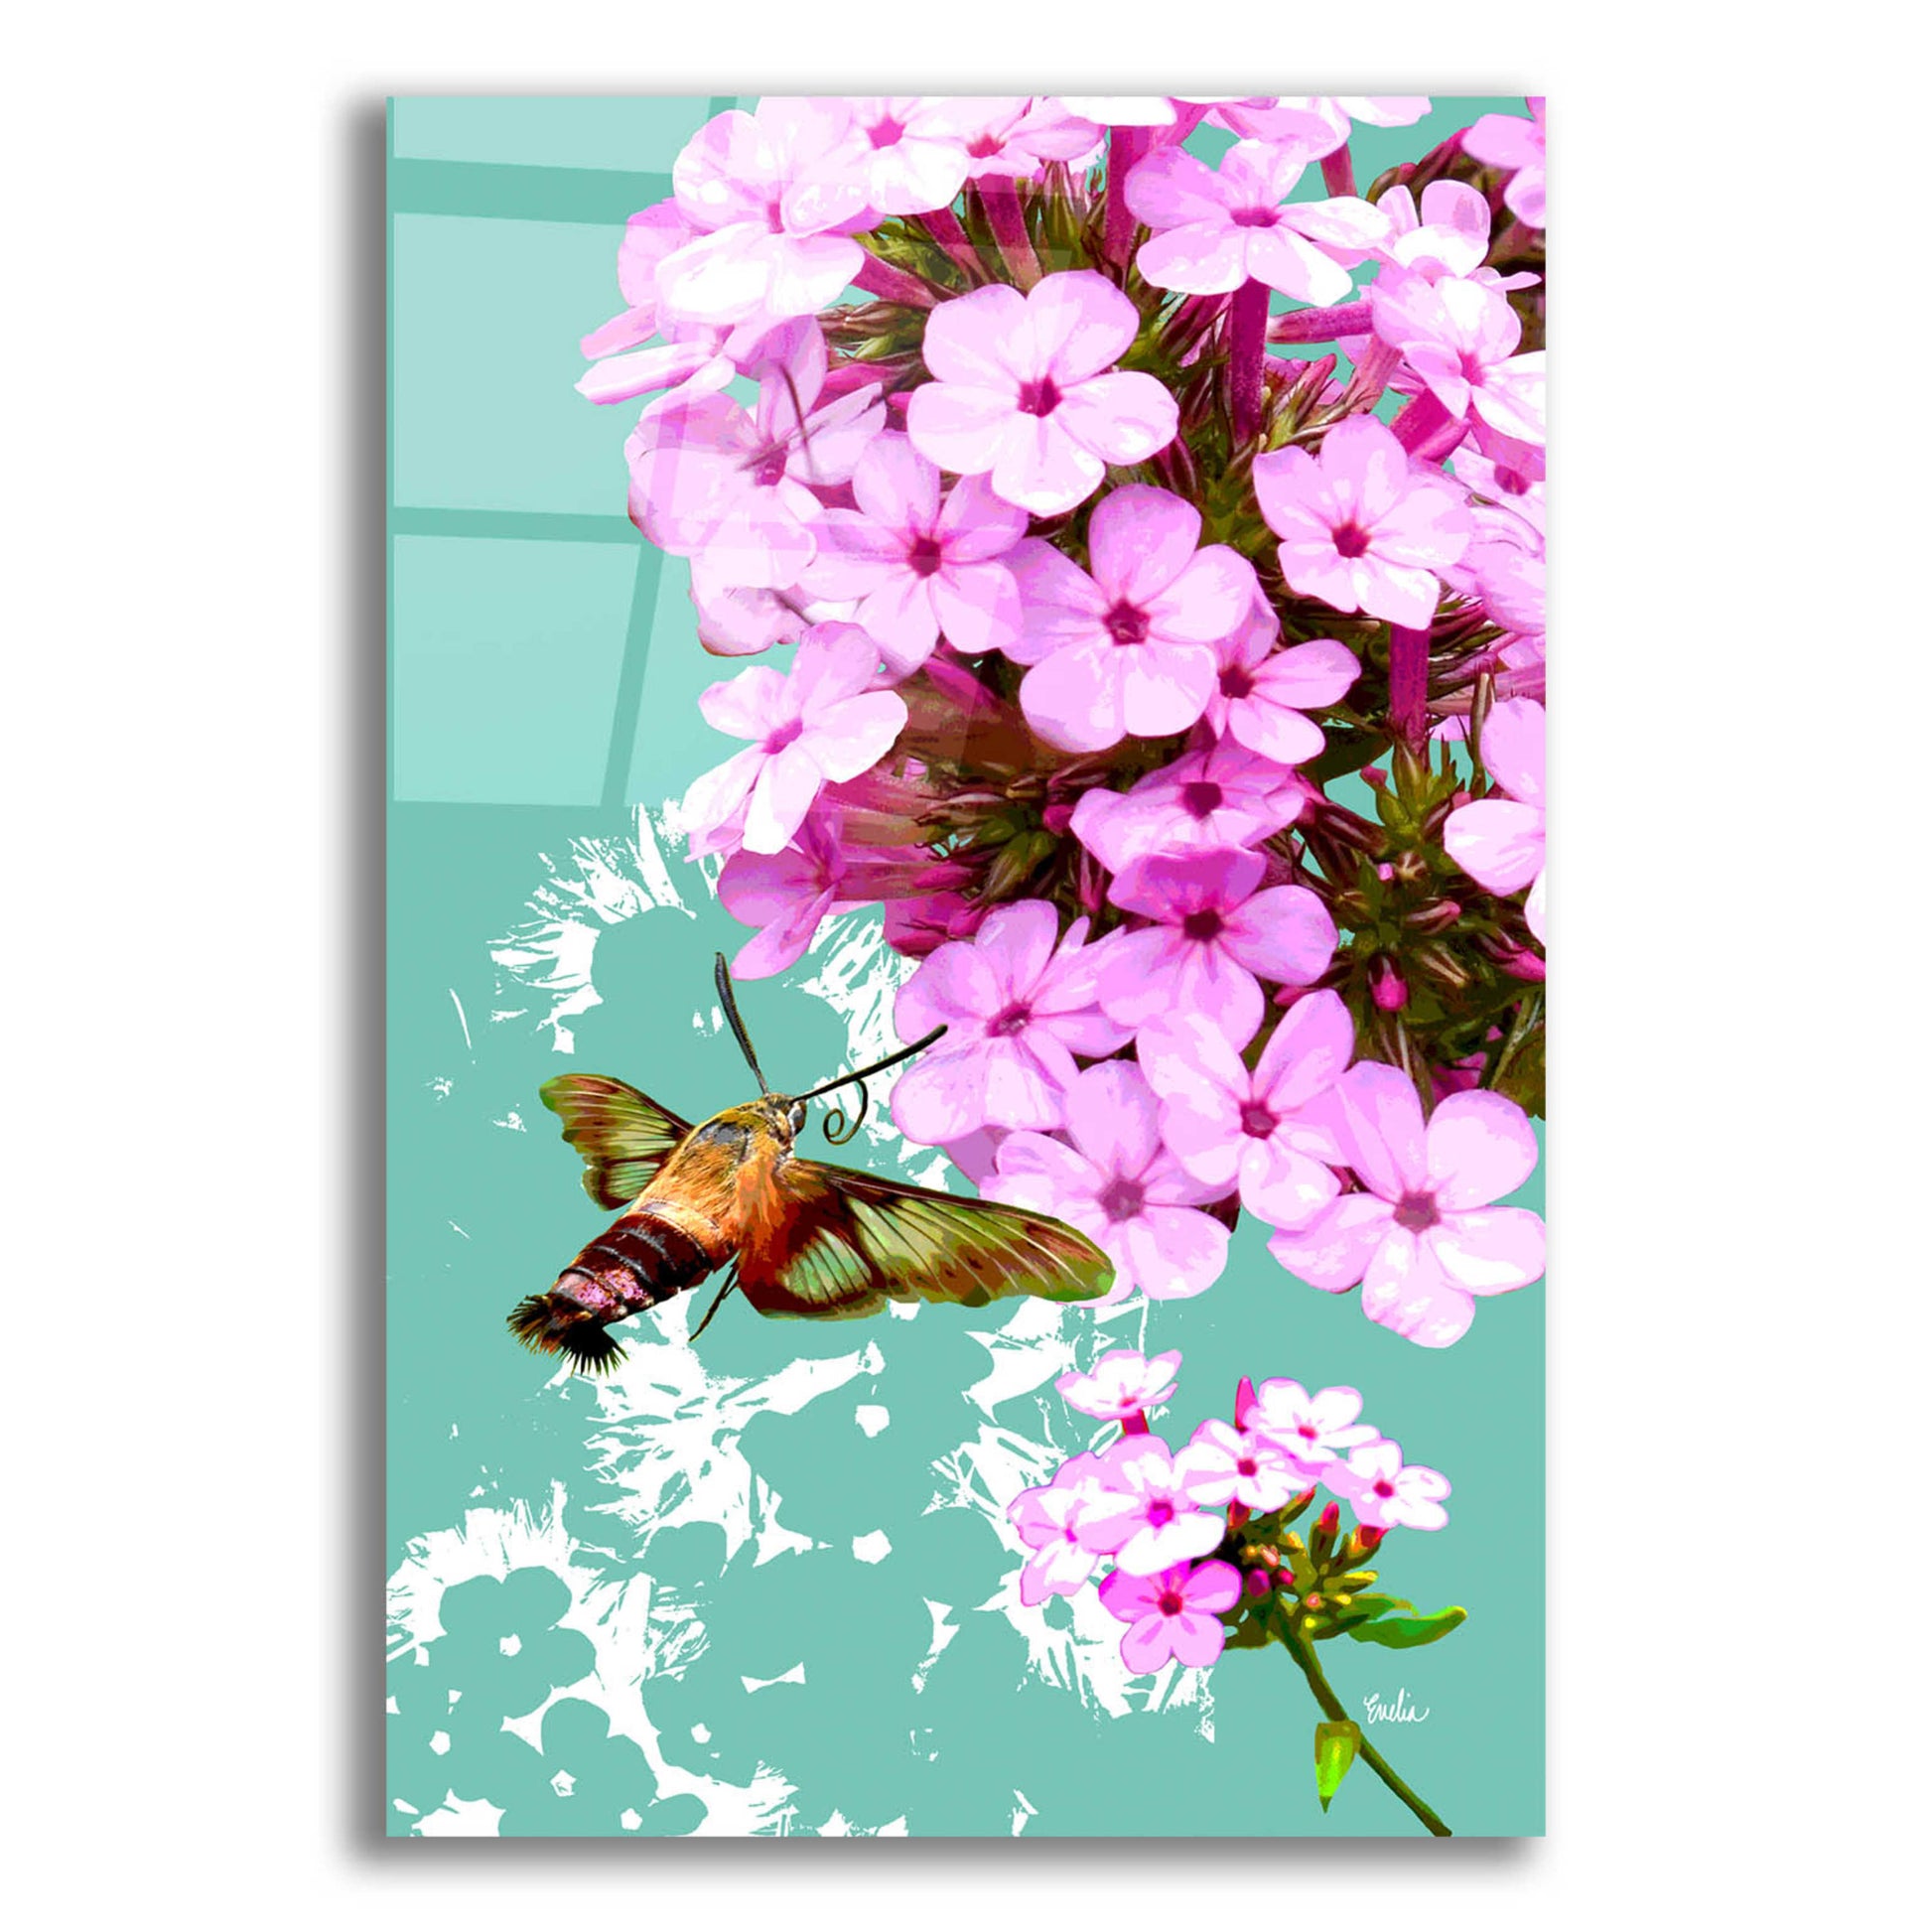 Epic Art 'Clearwing On Flox' by Evelia Designs Acrylic Glass Wall Art